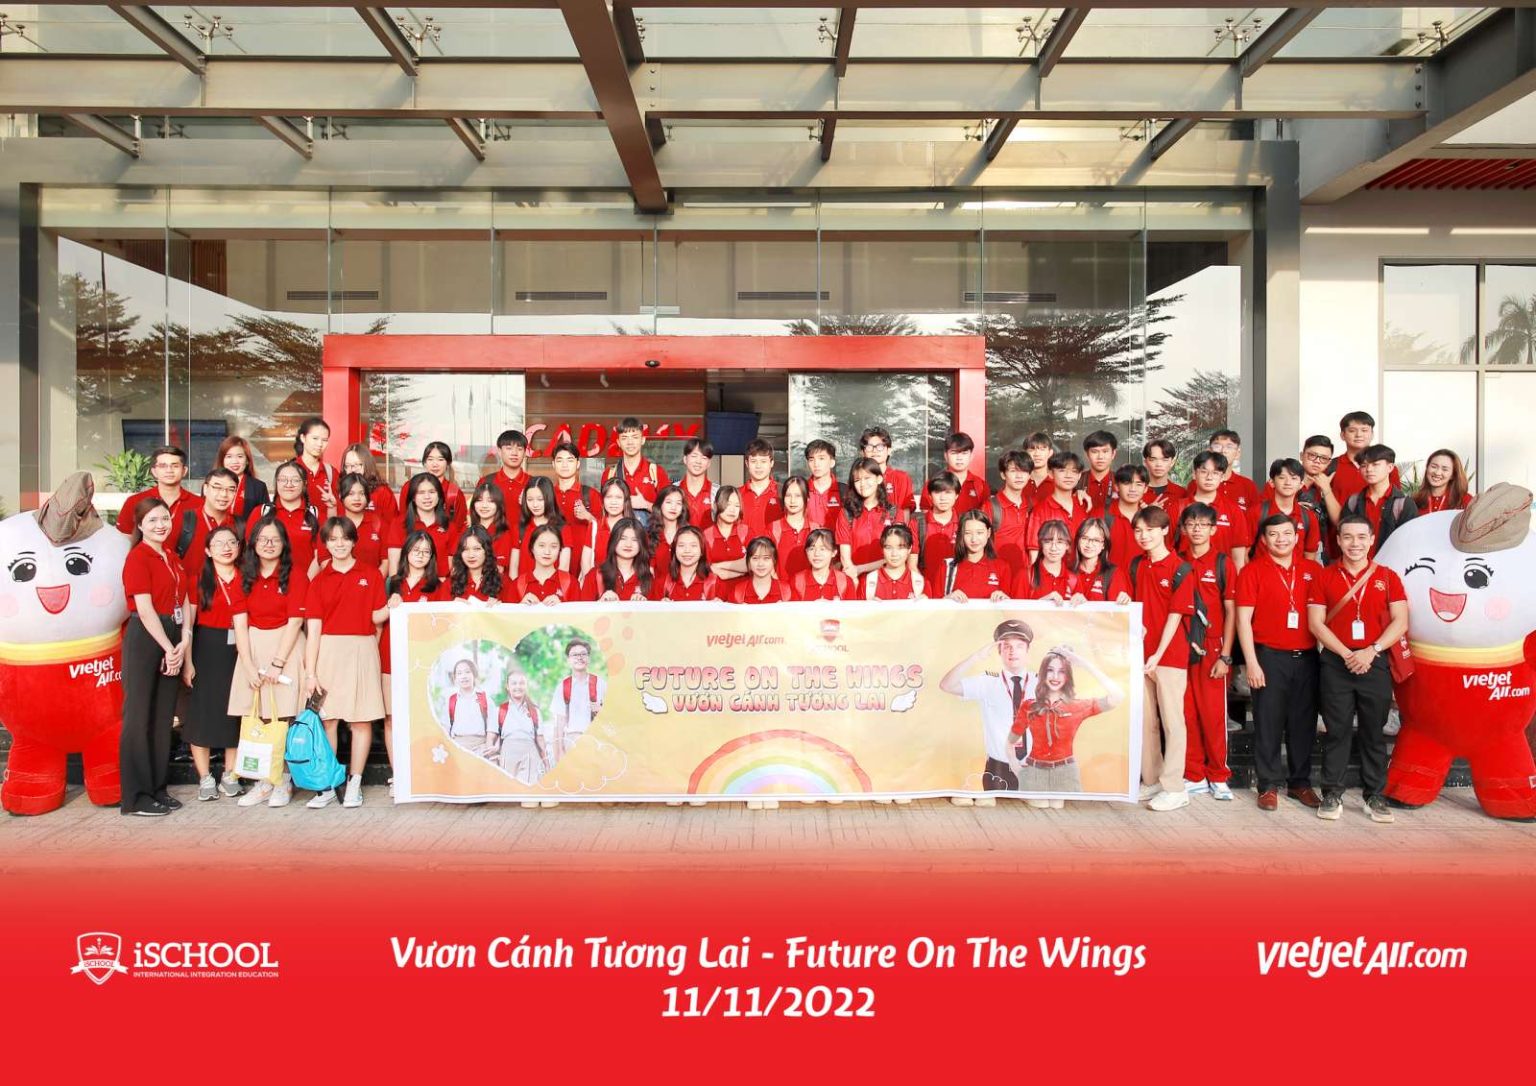 The career orientation event "Future on The Wings" was held by Vietjet Aviation Academy with a collaboration from iSchool international school system.